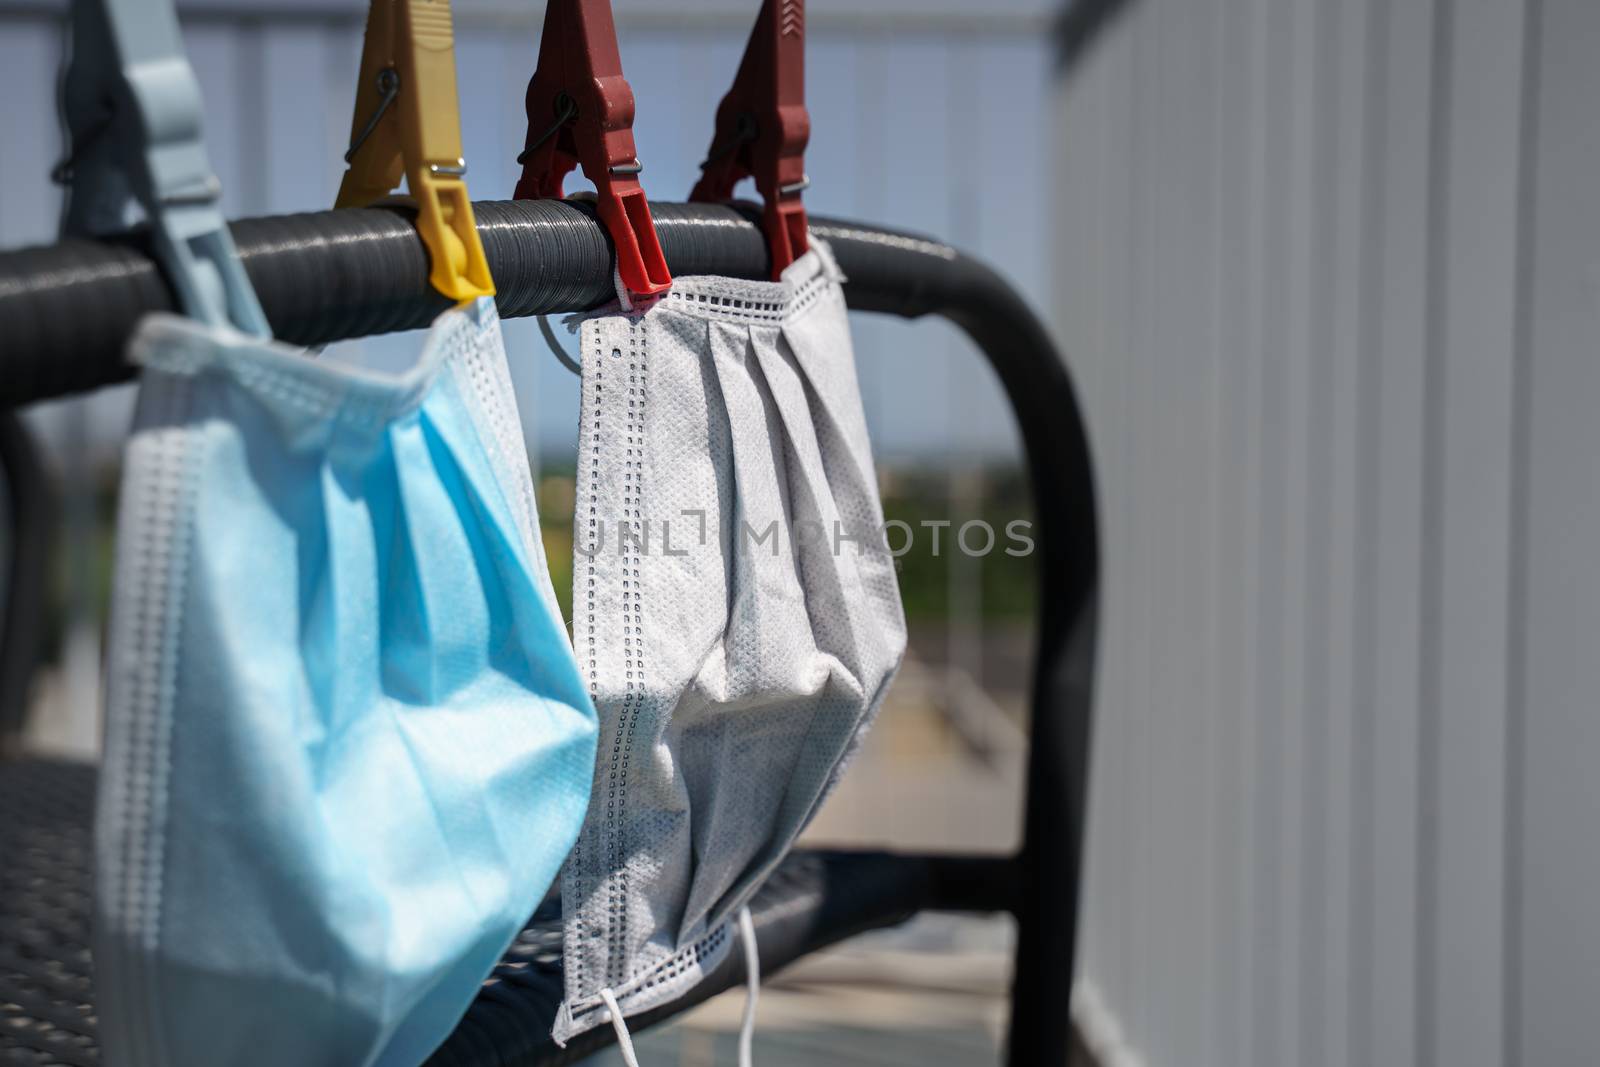 Surgical face mask for coronavirus hanging on clothesline string with clothespin. Reuse of these masks can minimize waste, protect the environment, and help to solve the current imminent shortage of masks.